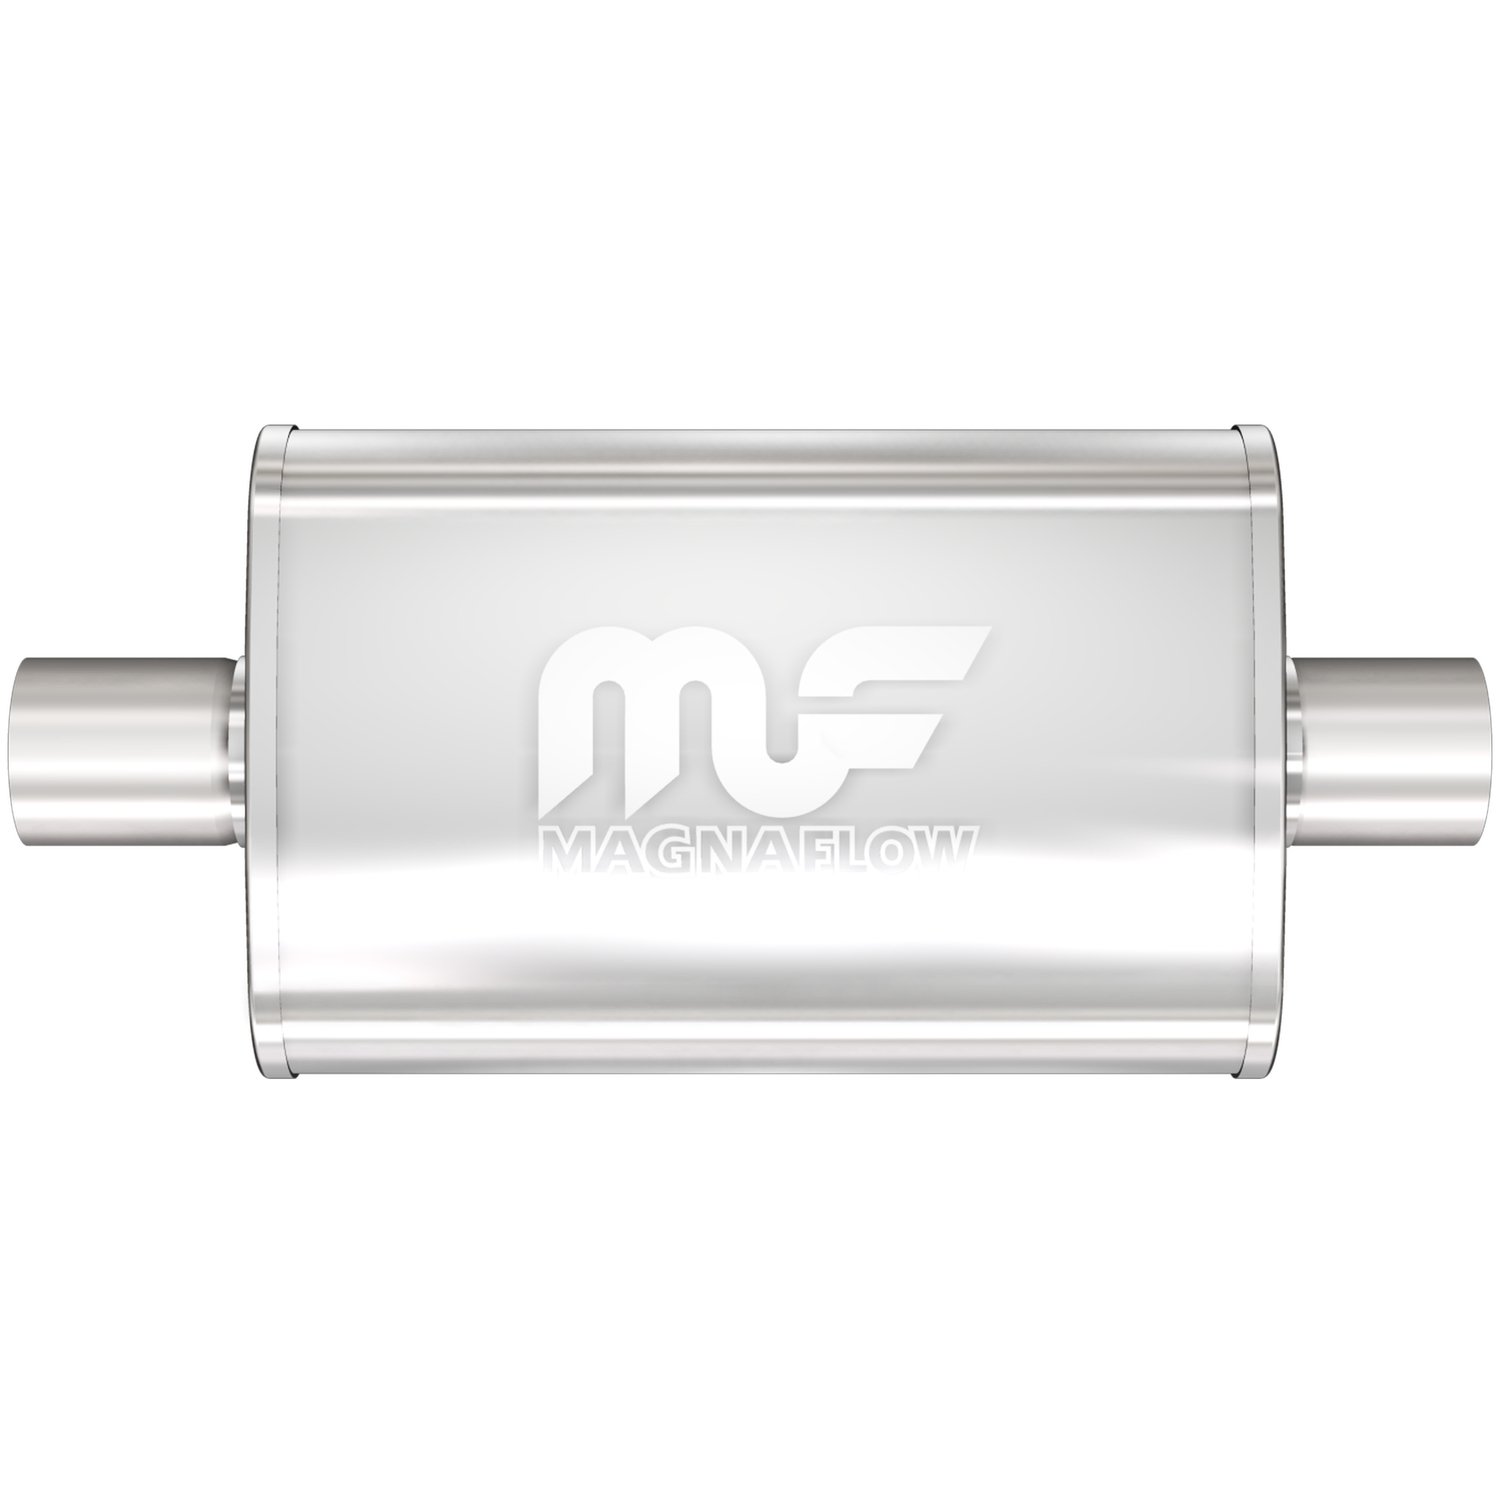 3.5" x 7" Oval Muffler Center In/Center Out: 1.75" /1.75" Body Length: 14" Overall Length: 20" Core Size: 2" Satin Finish